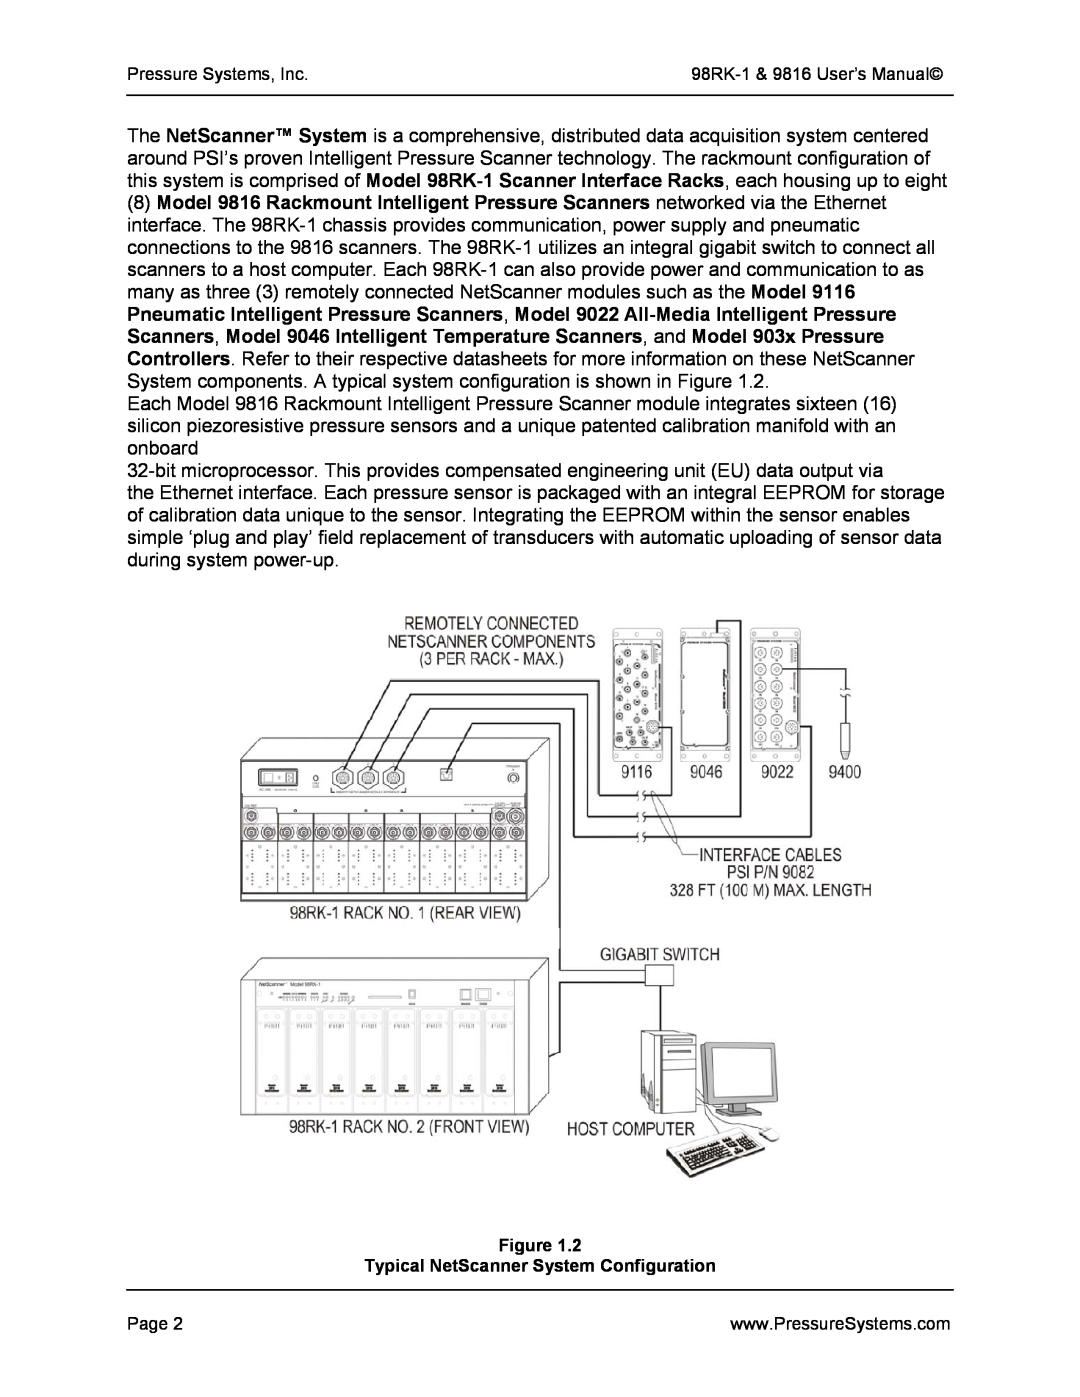 Pressure Systems 98RK-1 user manual Typical NetScanner System Configuration 